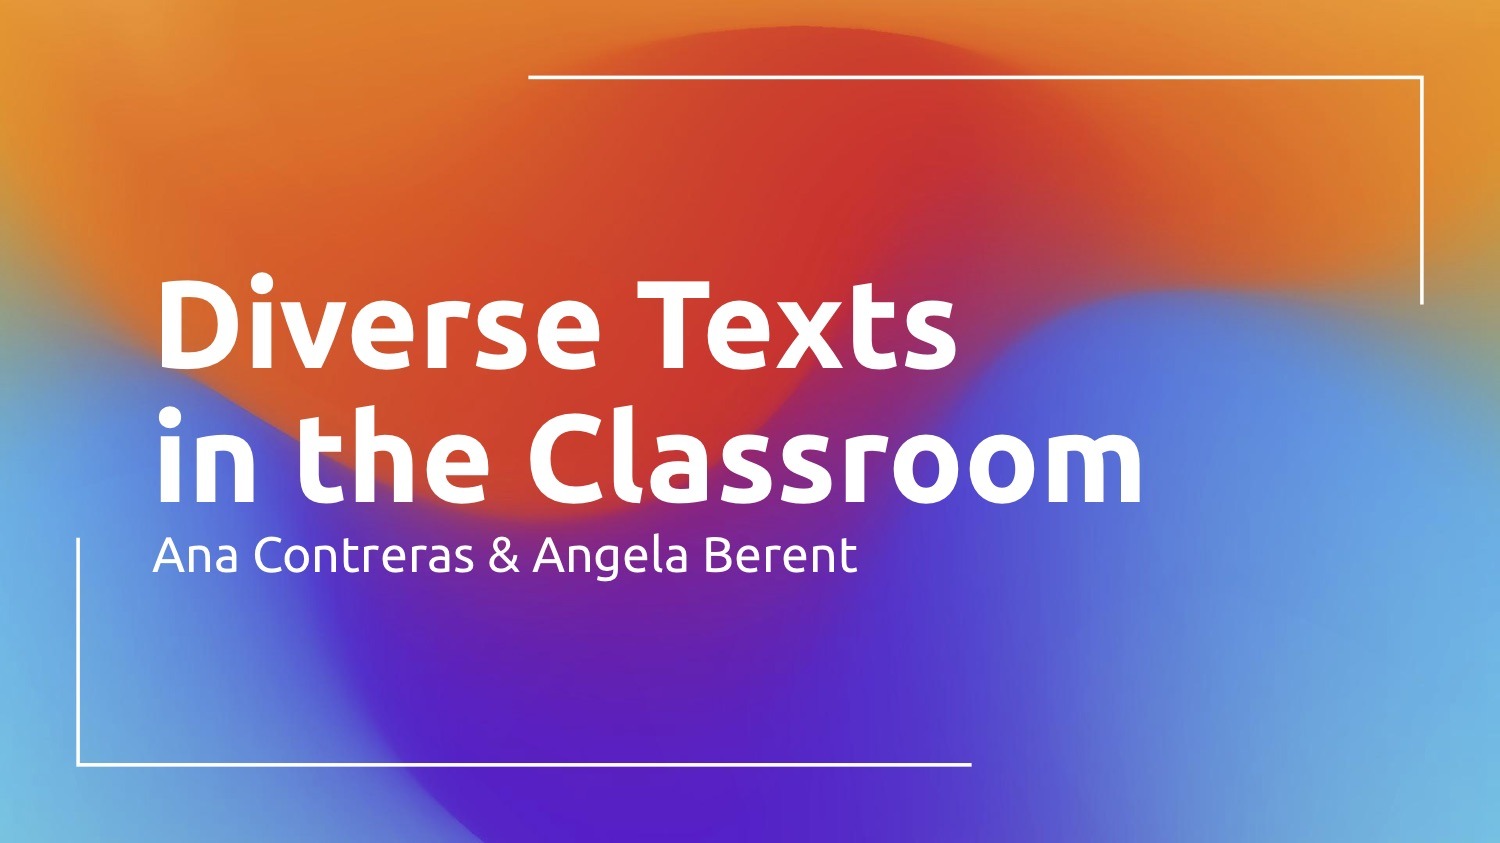 Diverse Texts in the Classroom – Session #6 of the CRWP 2020-21 Webinar Series